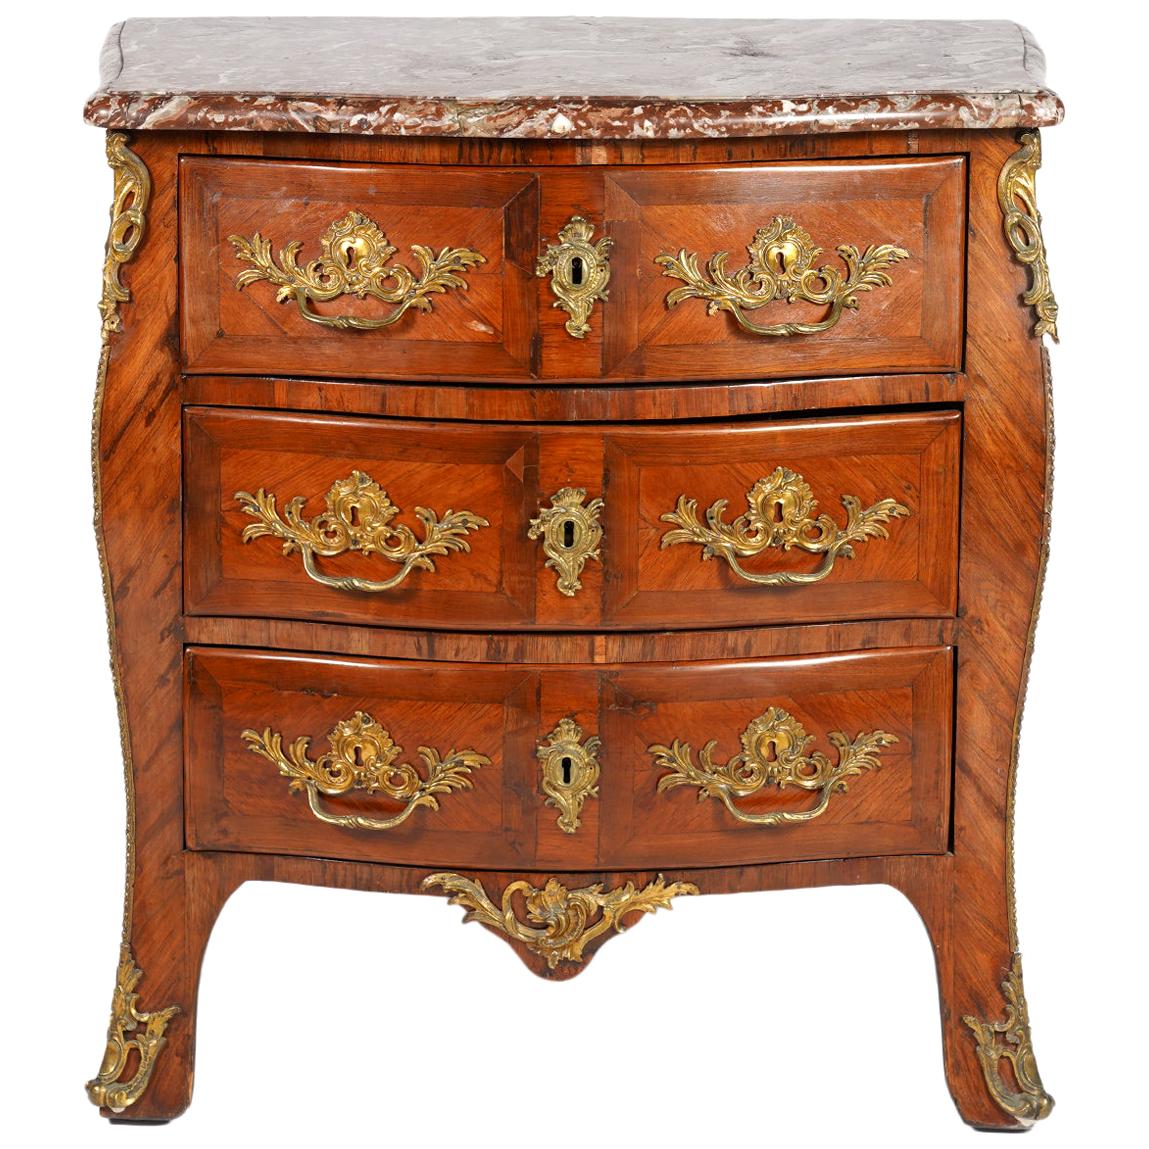 Louis XV Ormolu Mounted Serpentine Front Kingwood and Tulipwood Commode, 18th C